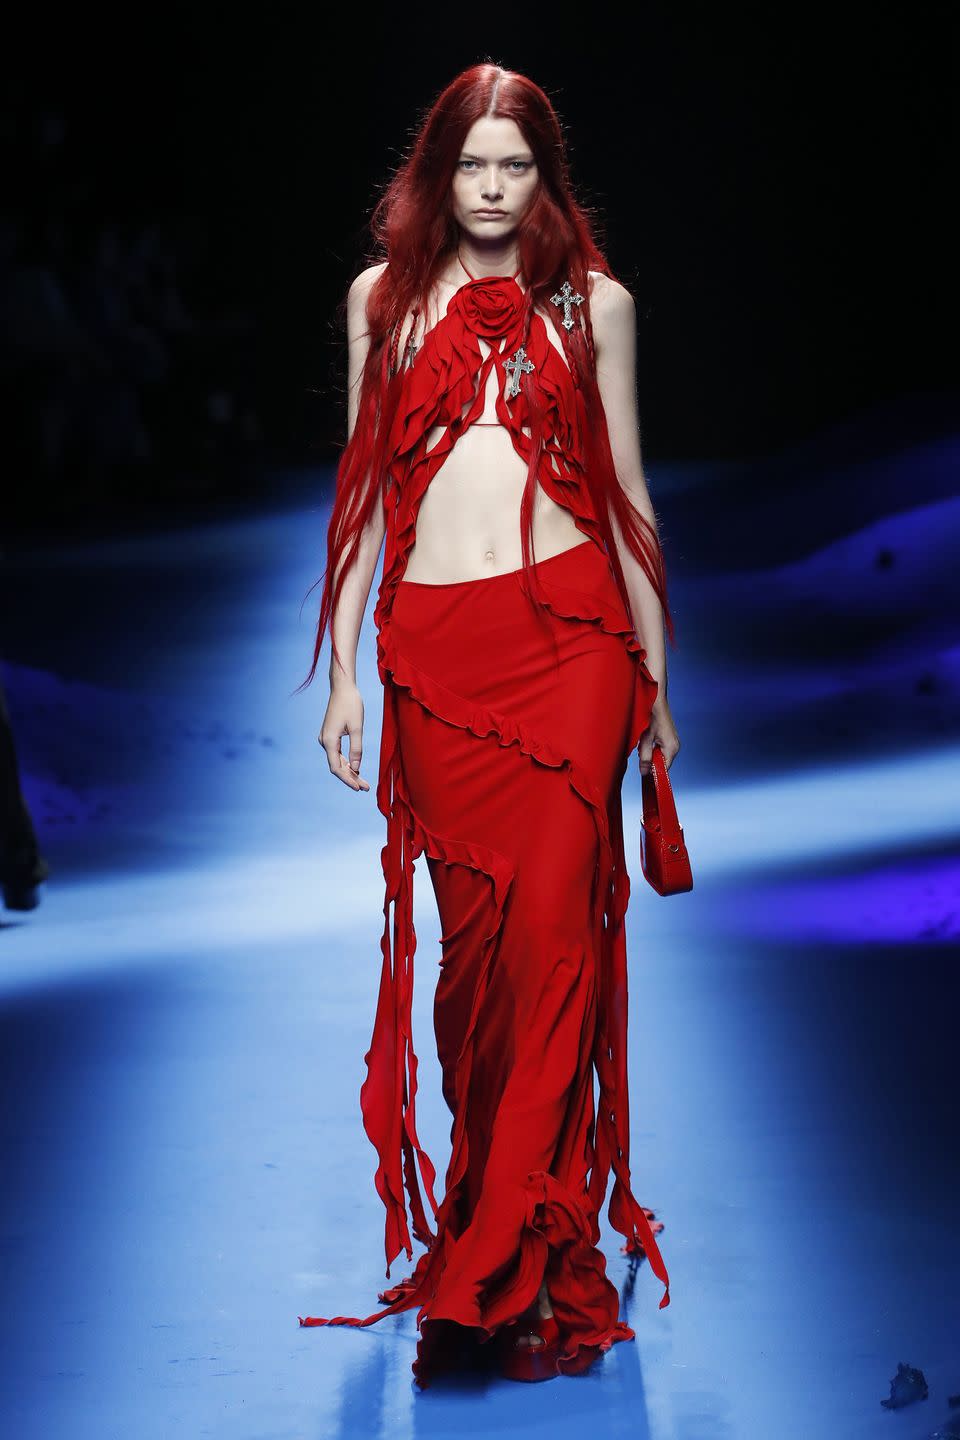 <p>No one does sexy quite like Blumarine—but this time around, the label is wading into deeper waters with a collection inspired by mermaids. But rather than leaning into the girly aesthetic we often see from the label, Blumarine puts out the siren song that is its spring 2023 collection. Think: ultra-flared, dark-wash denim, romantic draping, billowing trains, and endless ruffles that bring soft jellyfish to mind—oh, and there was also plenty of mesh and loose knits, too. One of our favorite details? The metal shell-shaped bras that have us thinking about if <em>The Little Mermaid</em>’s Ariel went goth.<em>—Dale Chong, senior fashion commerce editor</em></p>